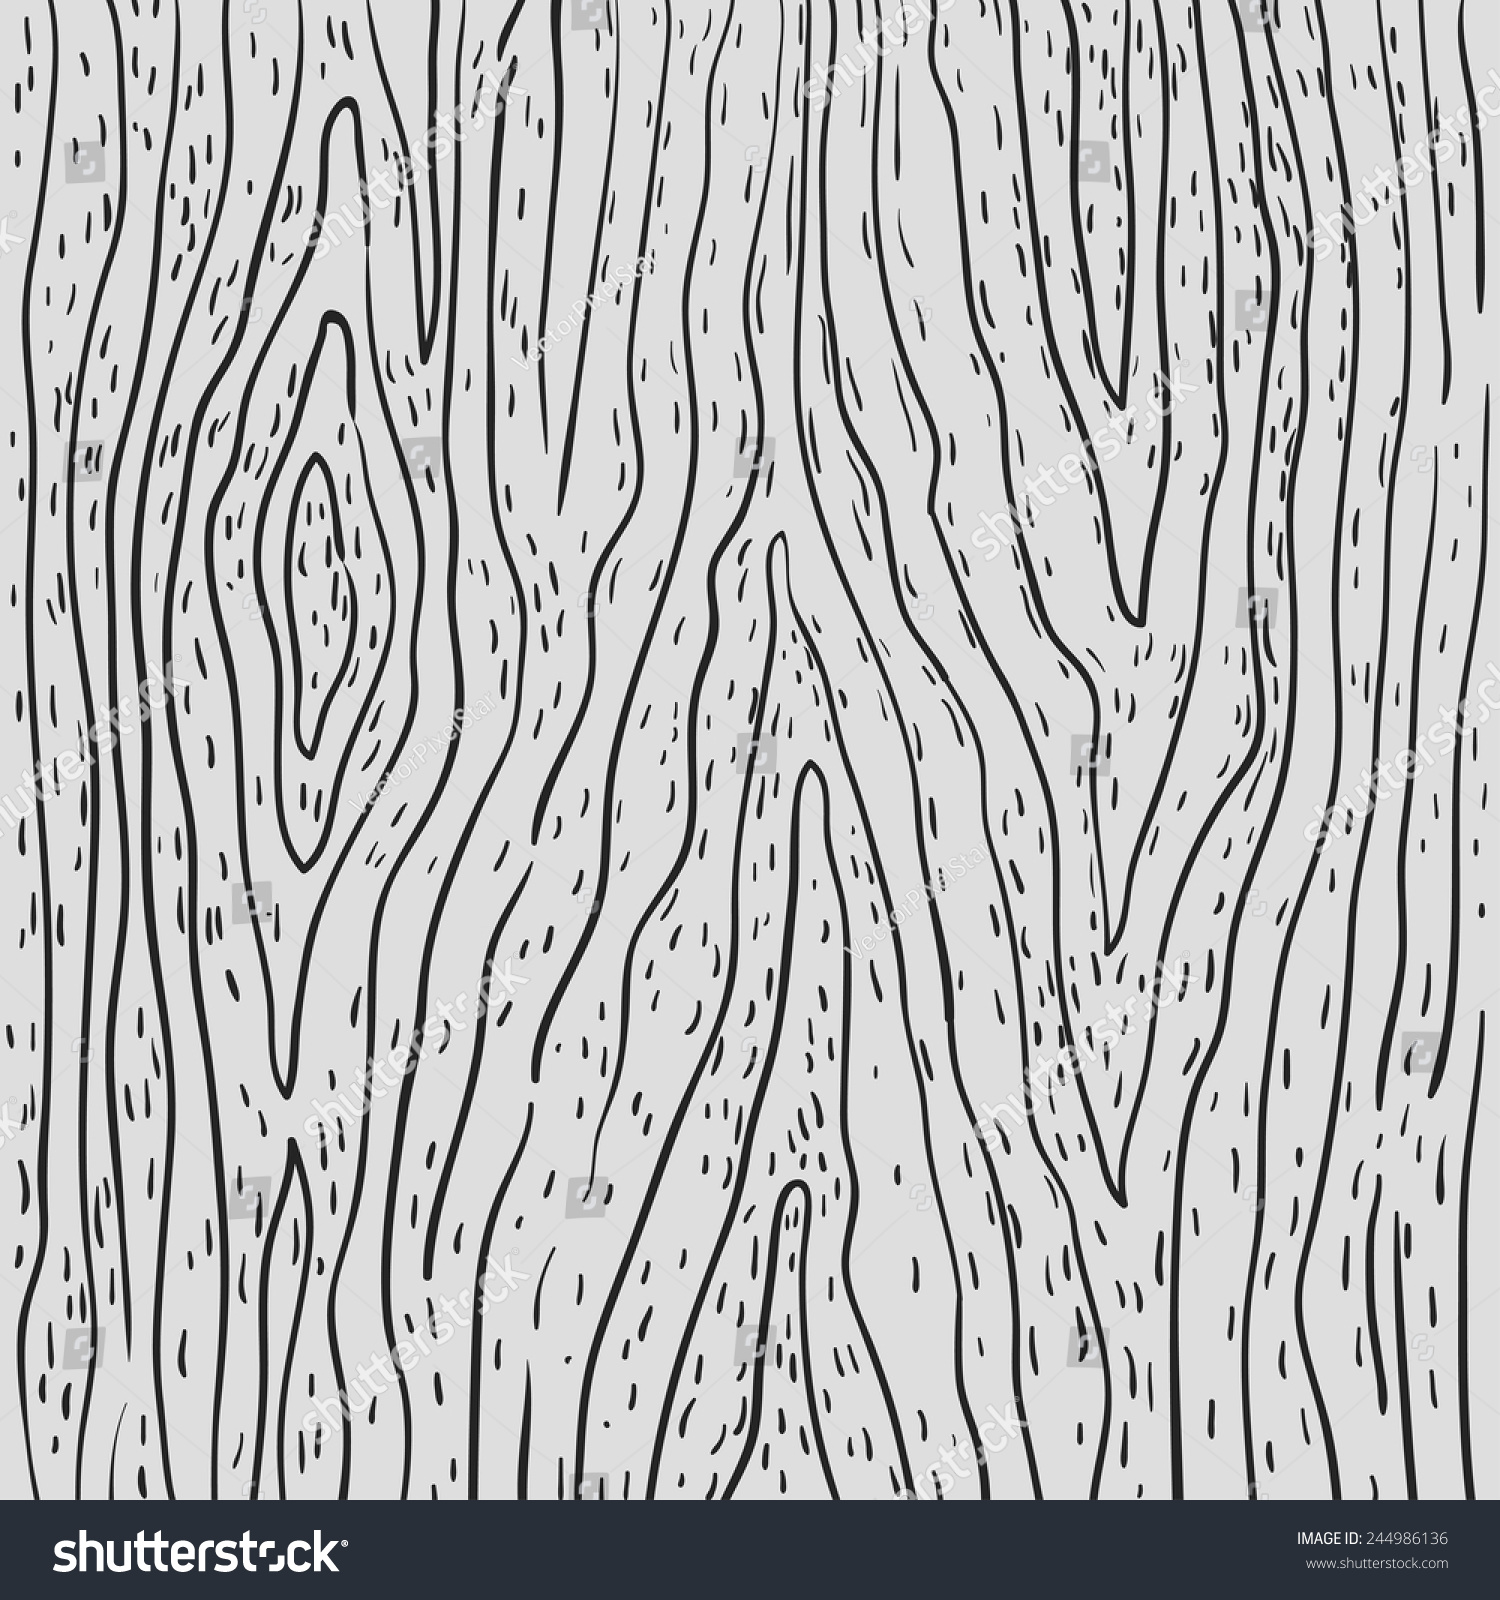 Light Wood Texture Doodle Sketch Style Stock Vector 244986136 ...